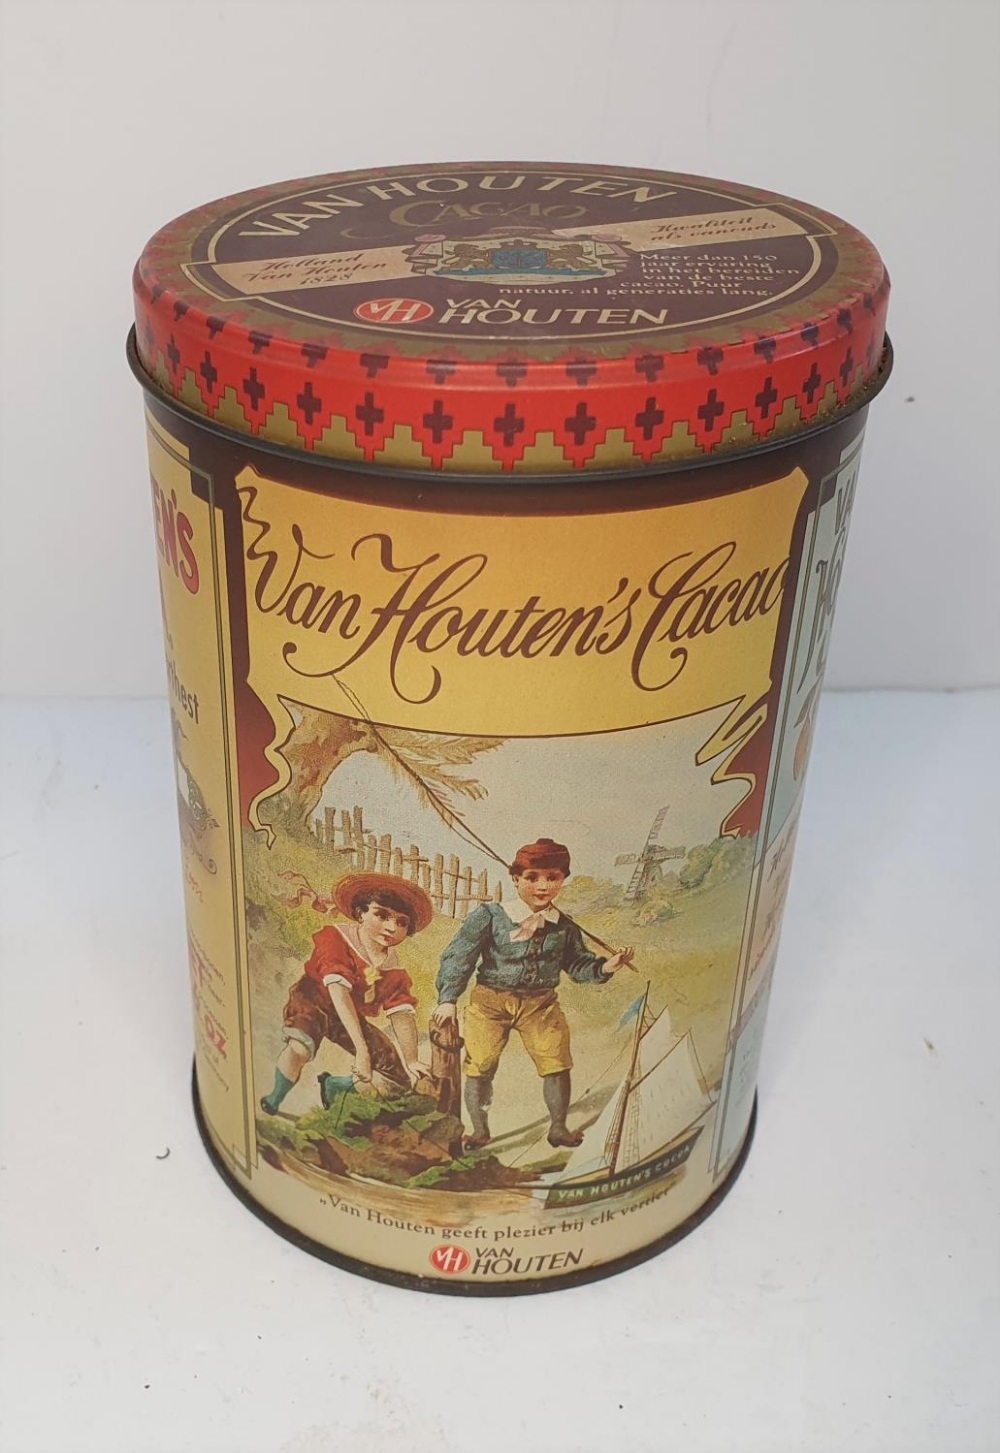 Early 20thC Van Houtens Cocoa (Holland) metal tin COMPLETE with sealed contents